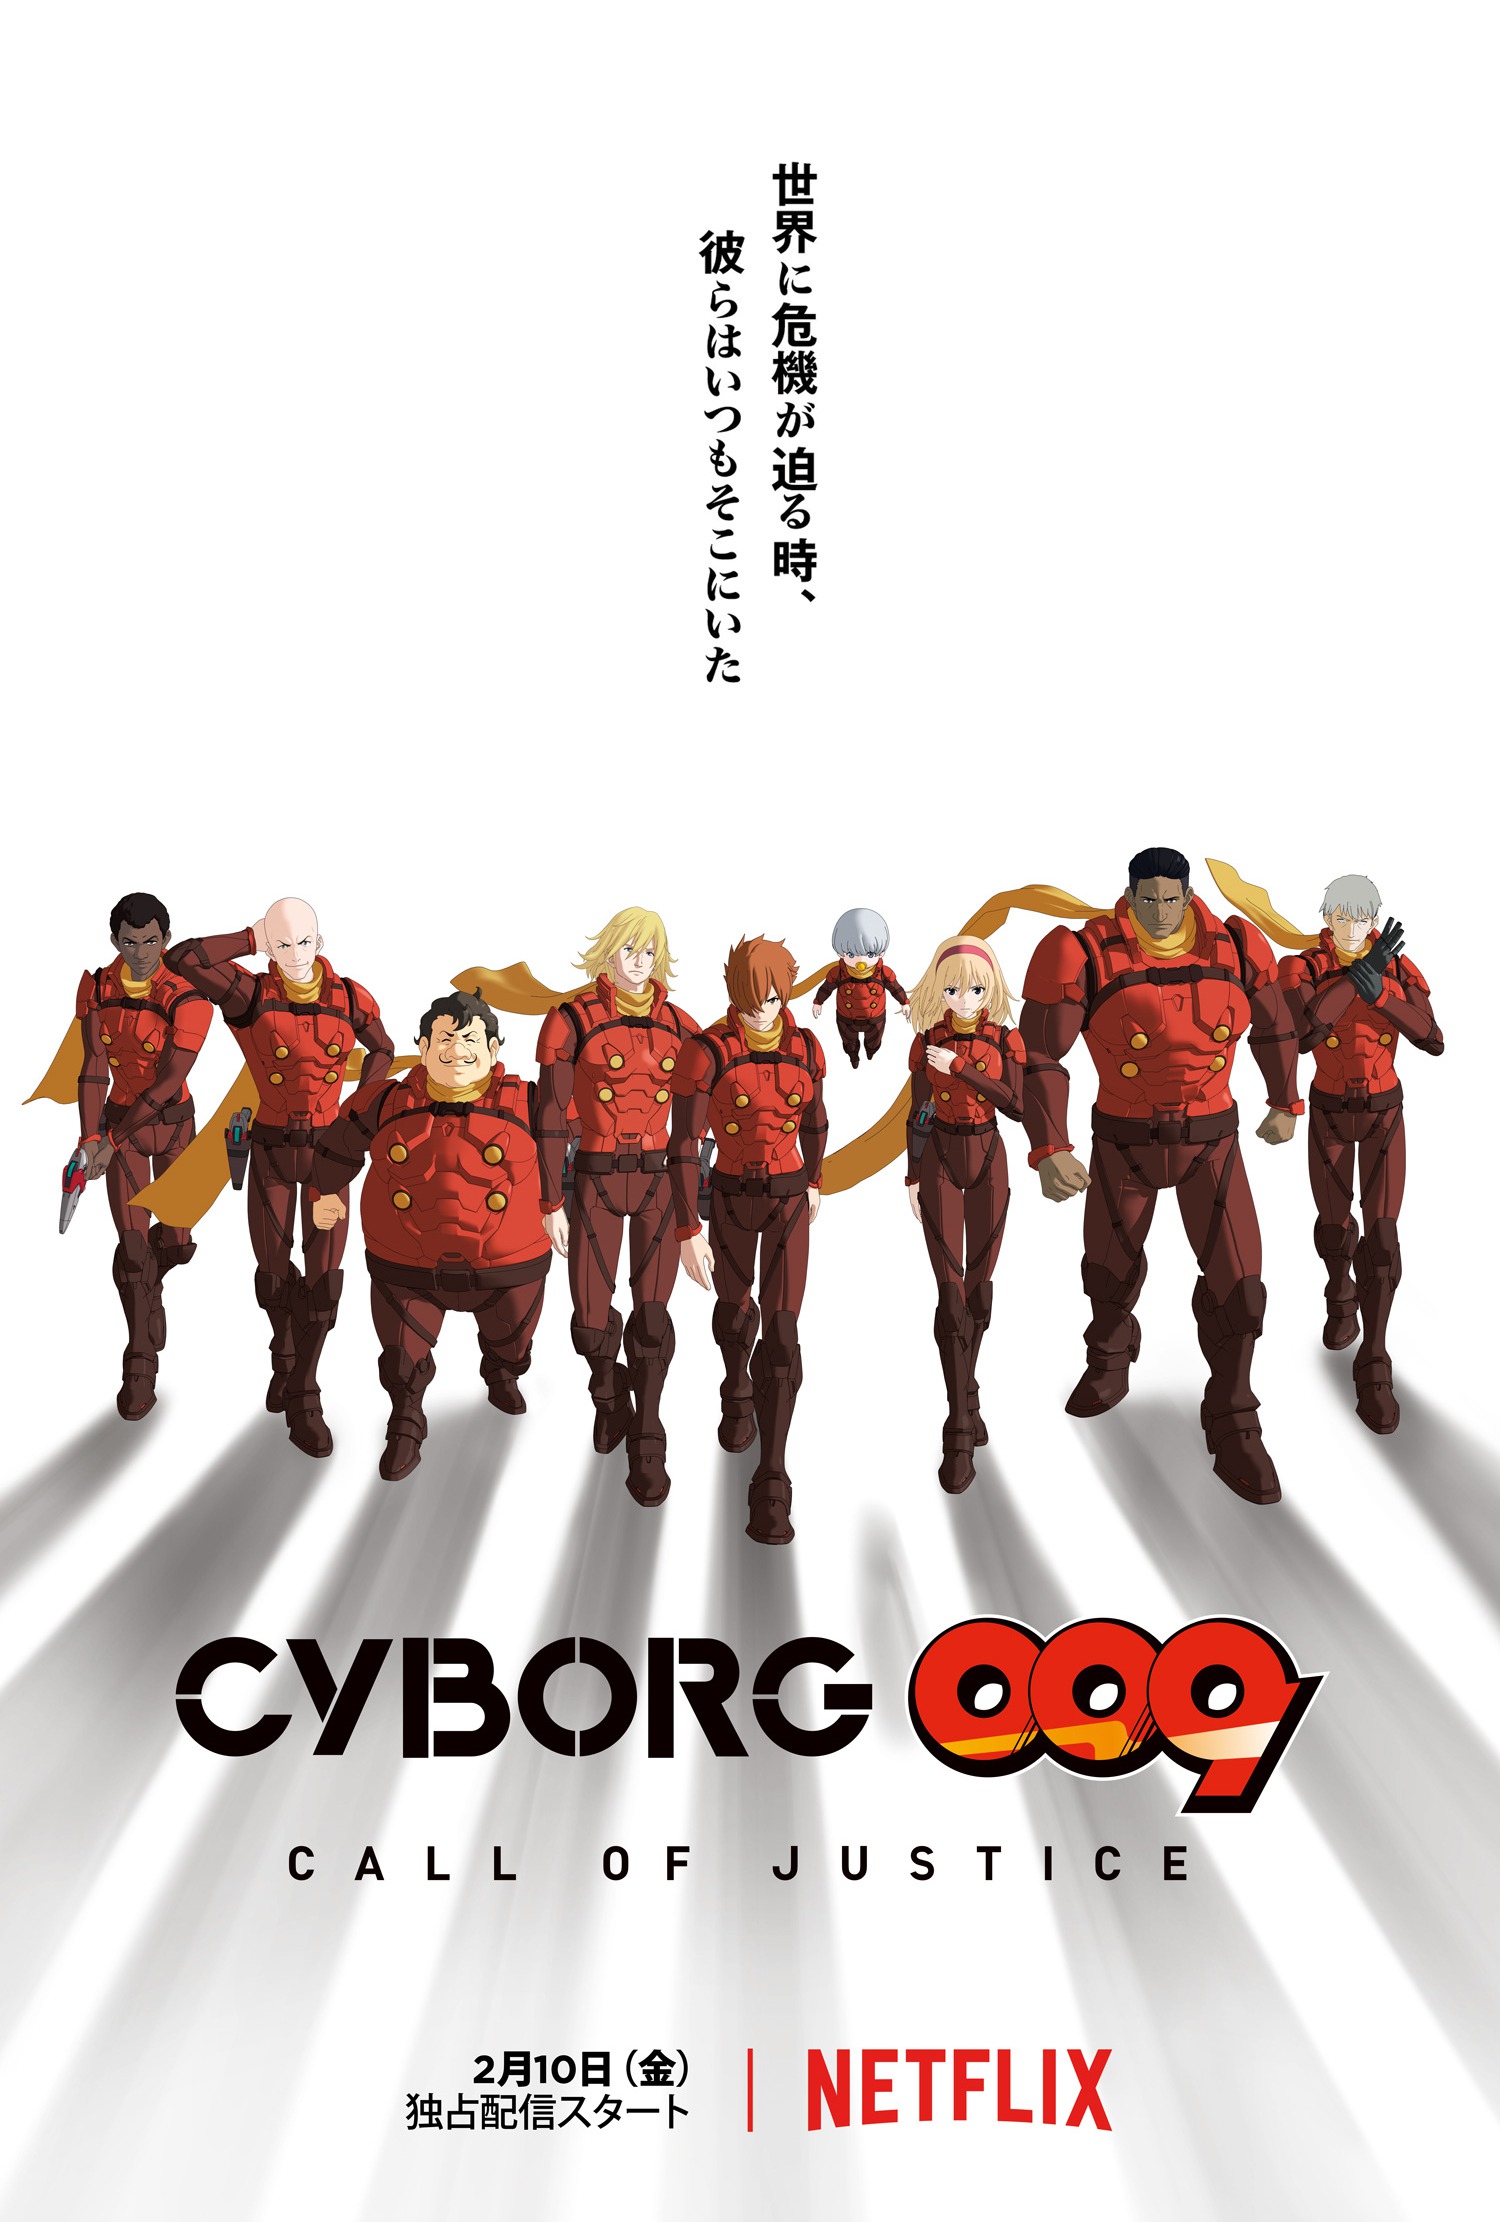 Mega Sized TV Poster Image for Cyborg 009: Call of Justice I 